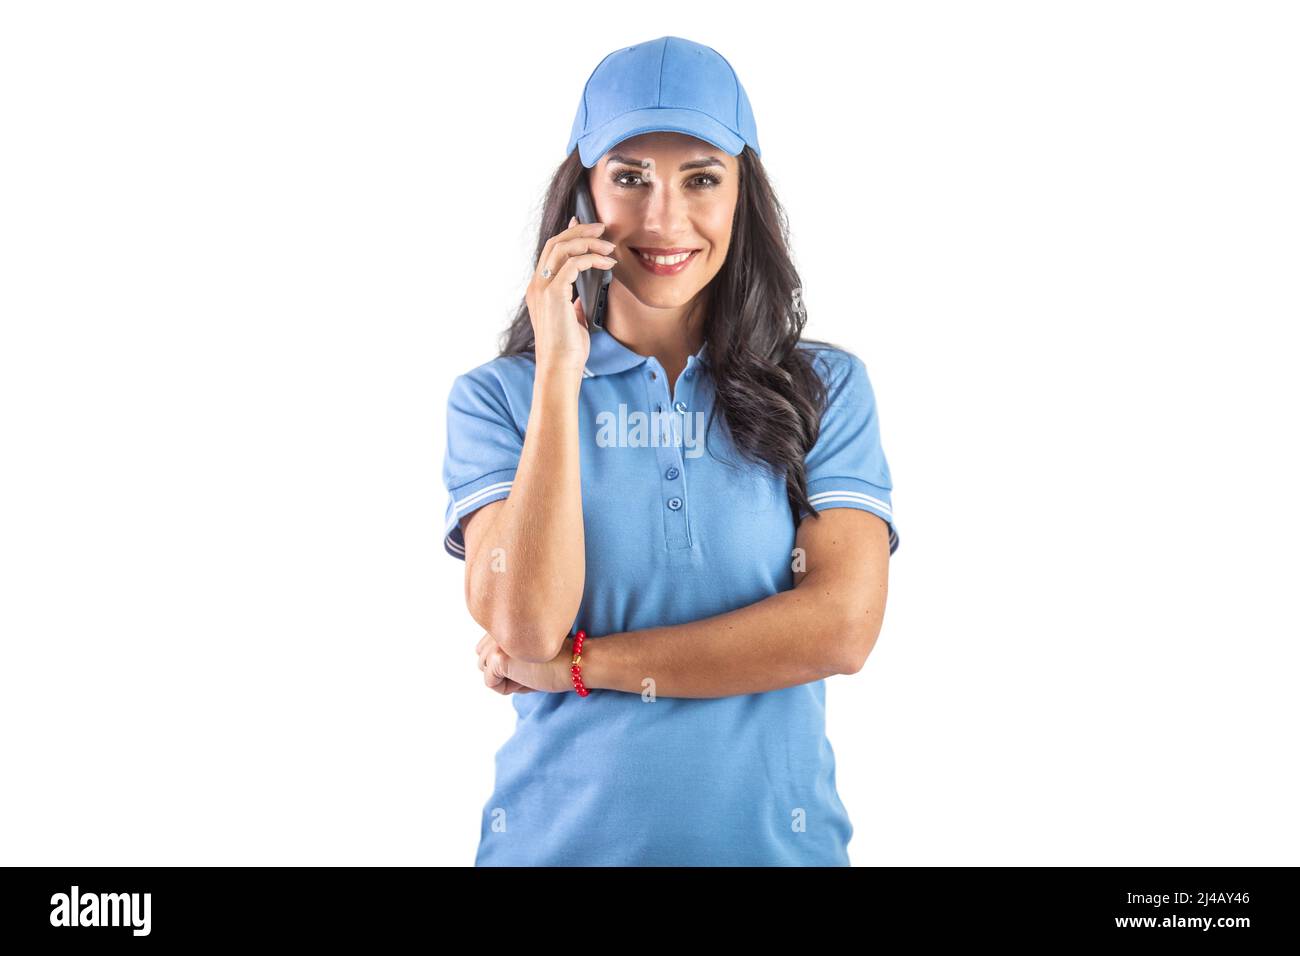 Attractive dark-haired delivery woman in blue uniform calling to a customer. Isolated white background. Stock Photo